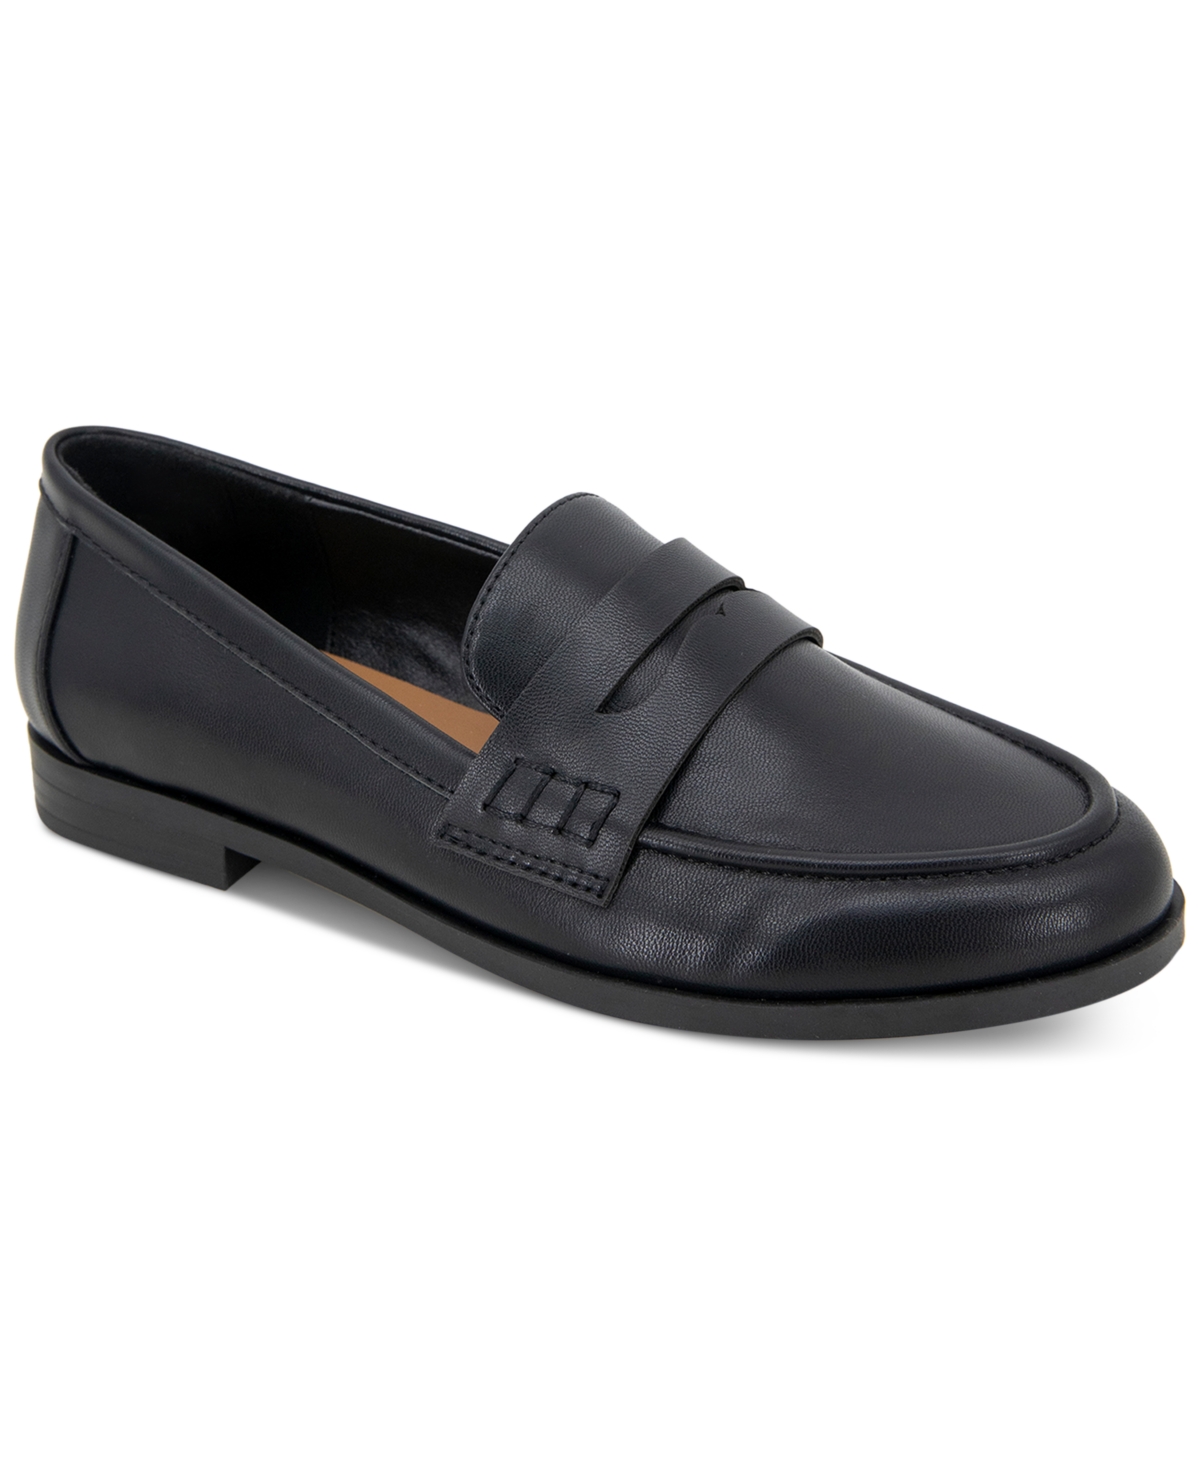 STYLE & CO WOMEN'S GIANNAA SLIP-ON LOAFER FLATS, CREATED FOR MACY'S